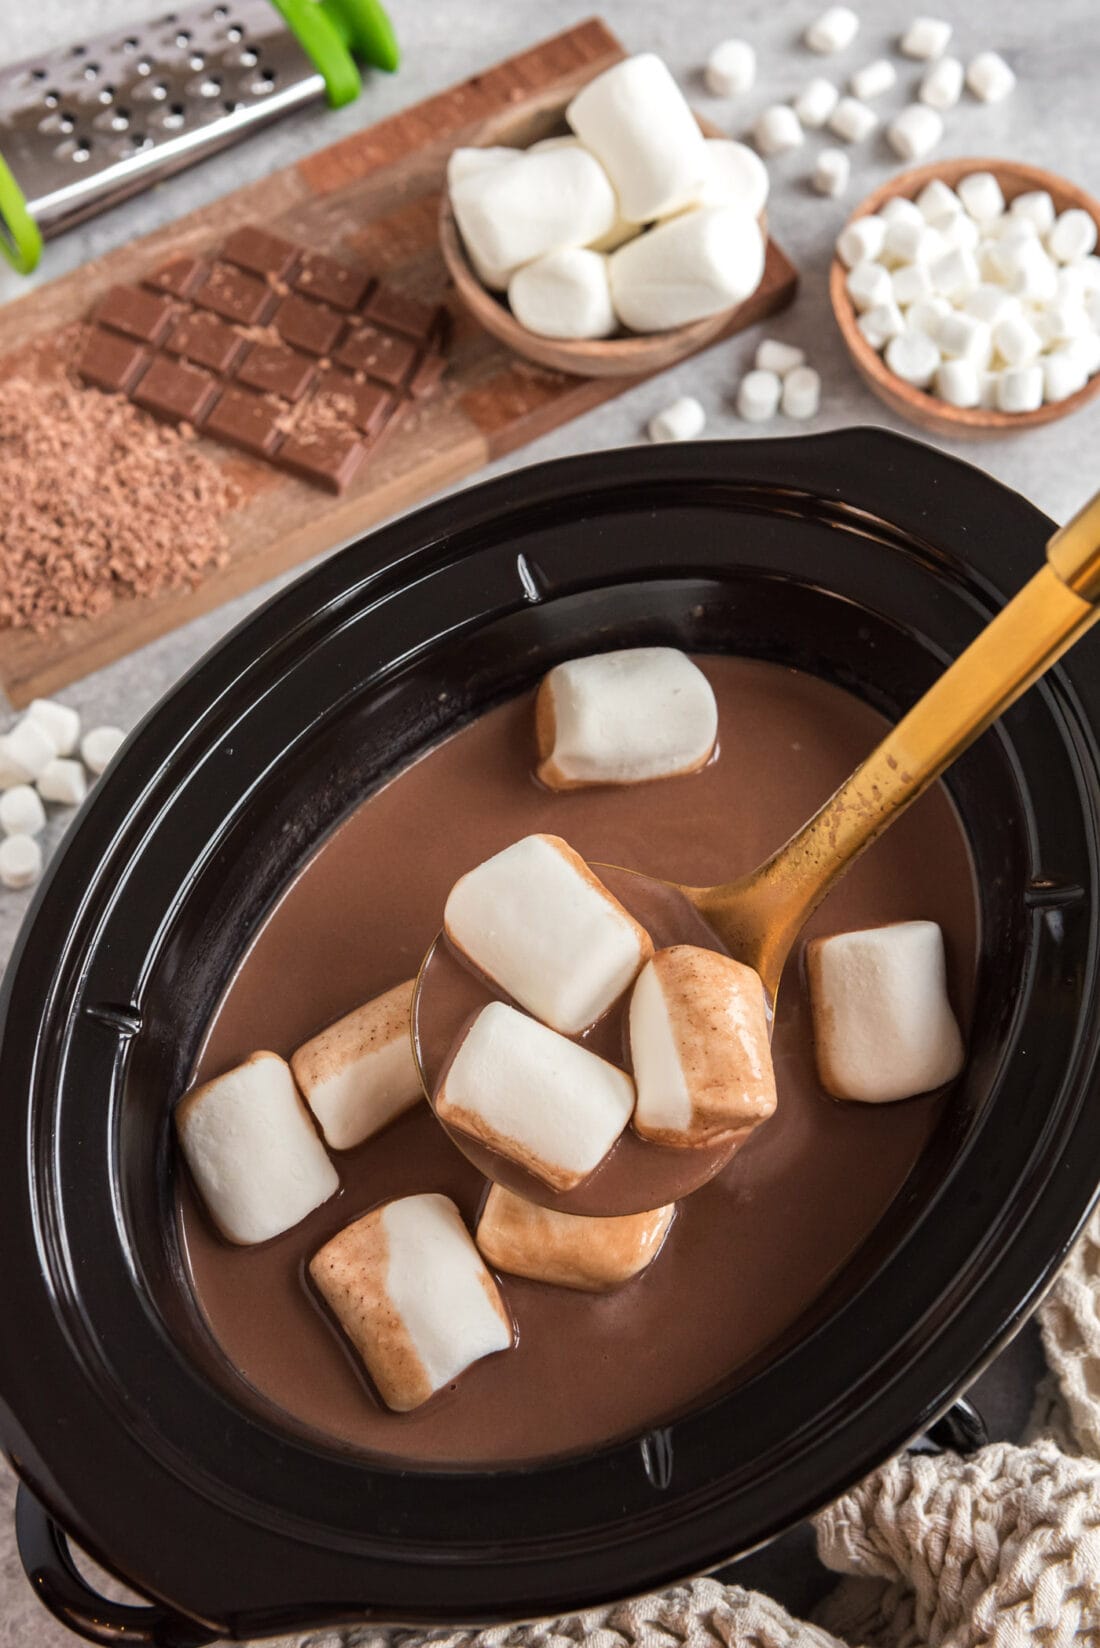 Spoonful of Crockpot Hot Chocolate with marshmallows being lifted out of the crockpot